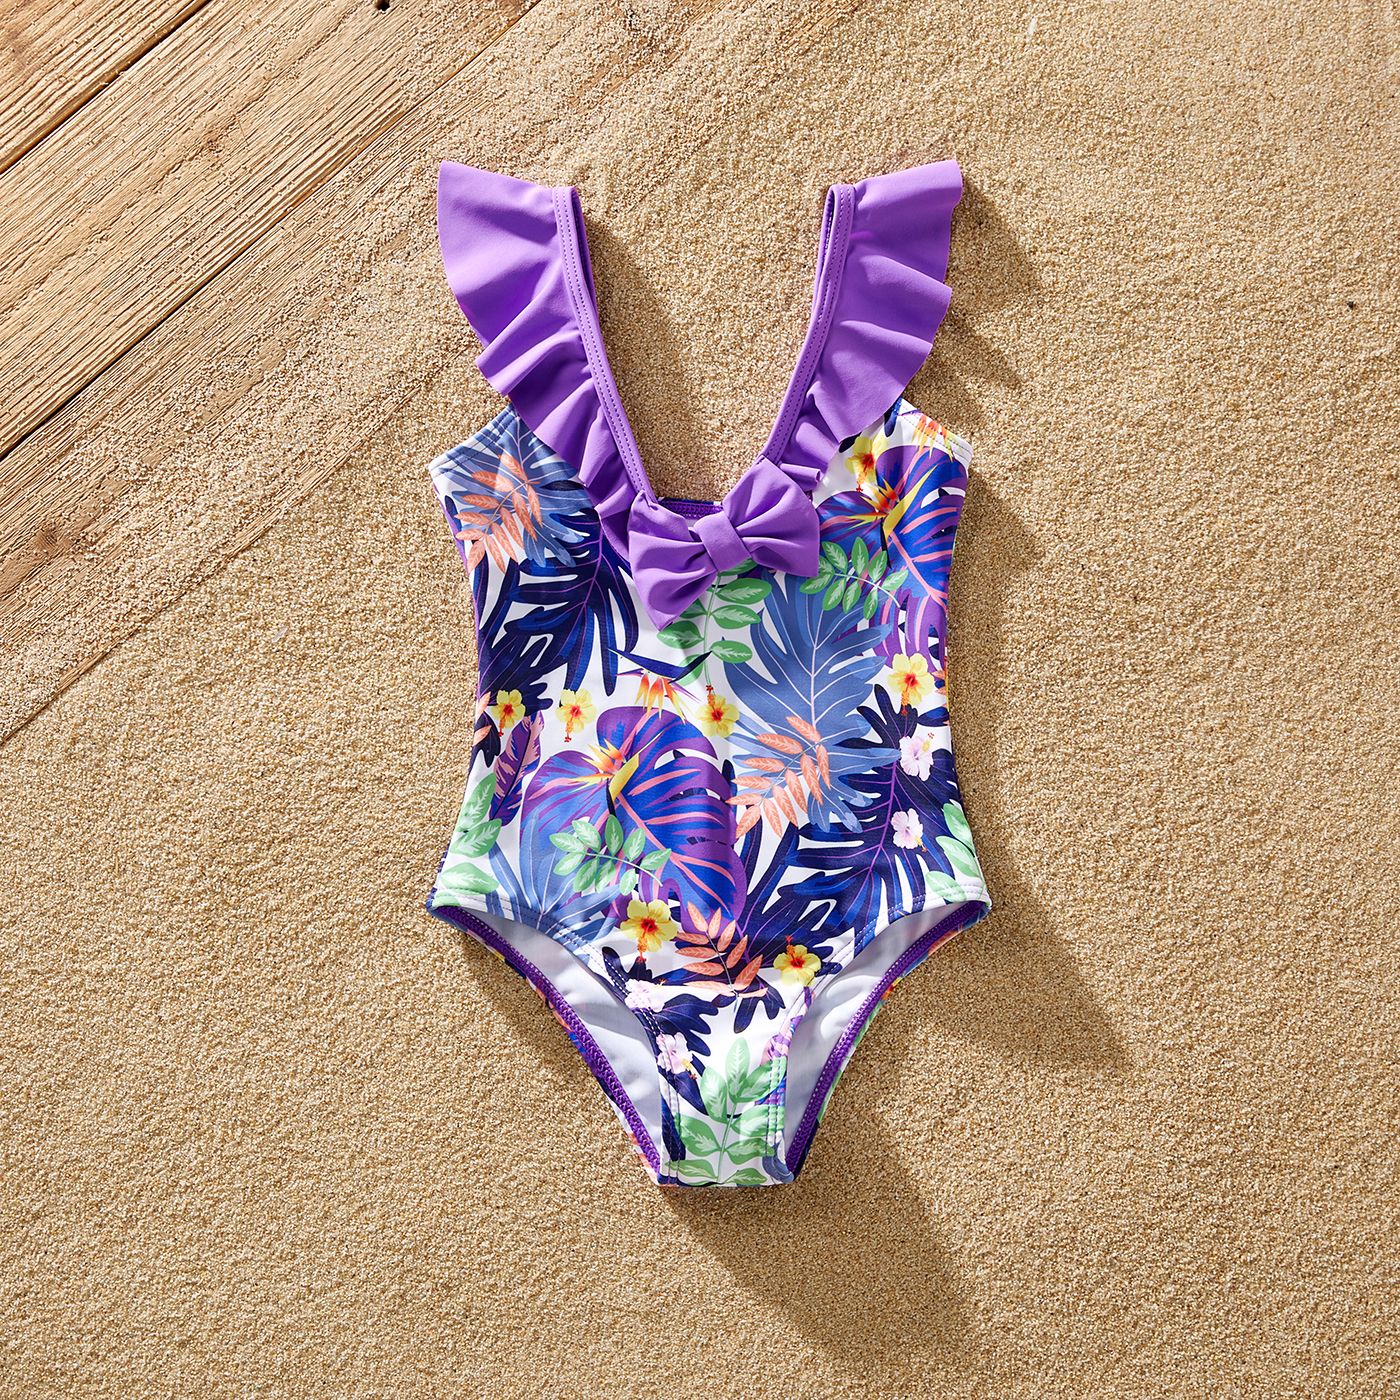 Family Matching Plant Print Ruffled One-piece Swimsuit or Swim Trunks Shorts